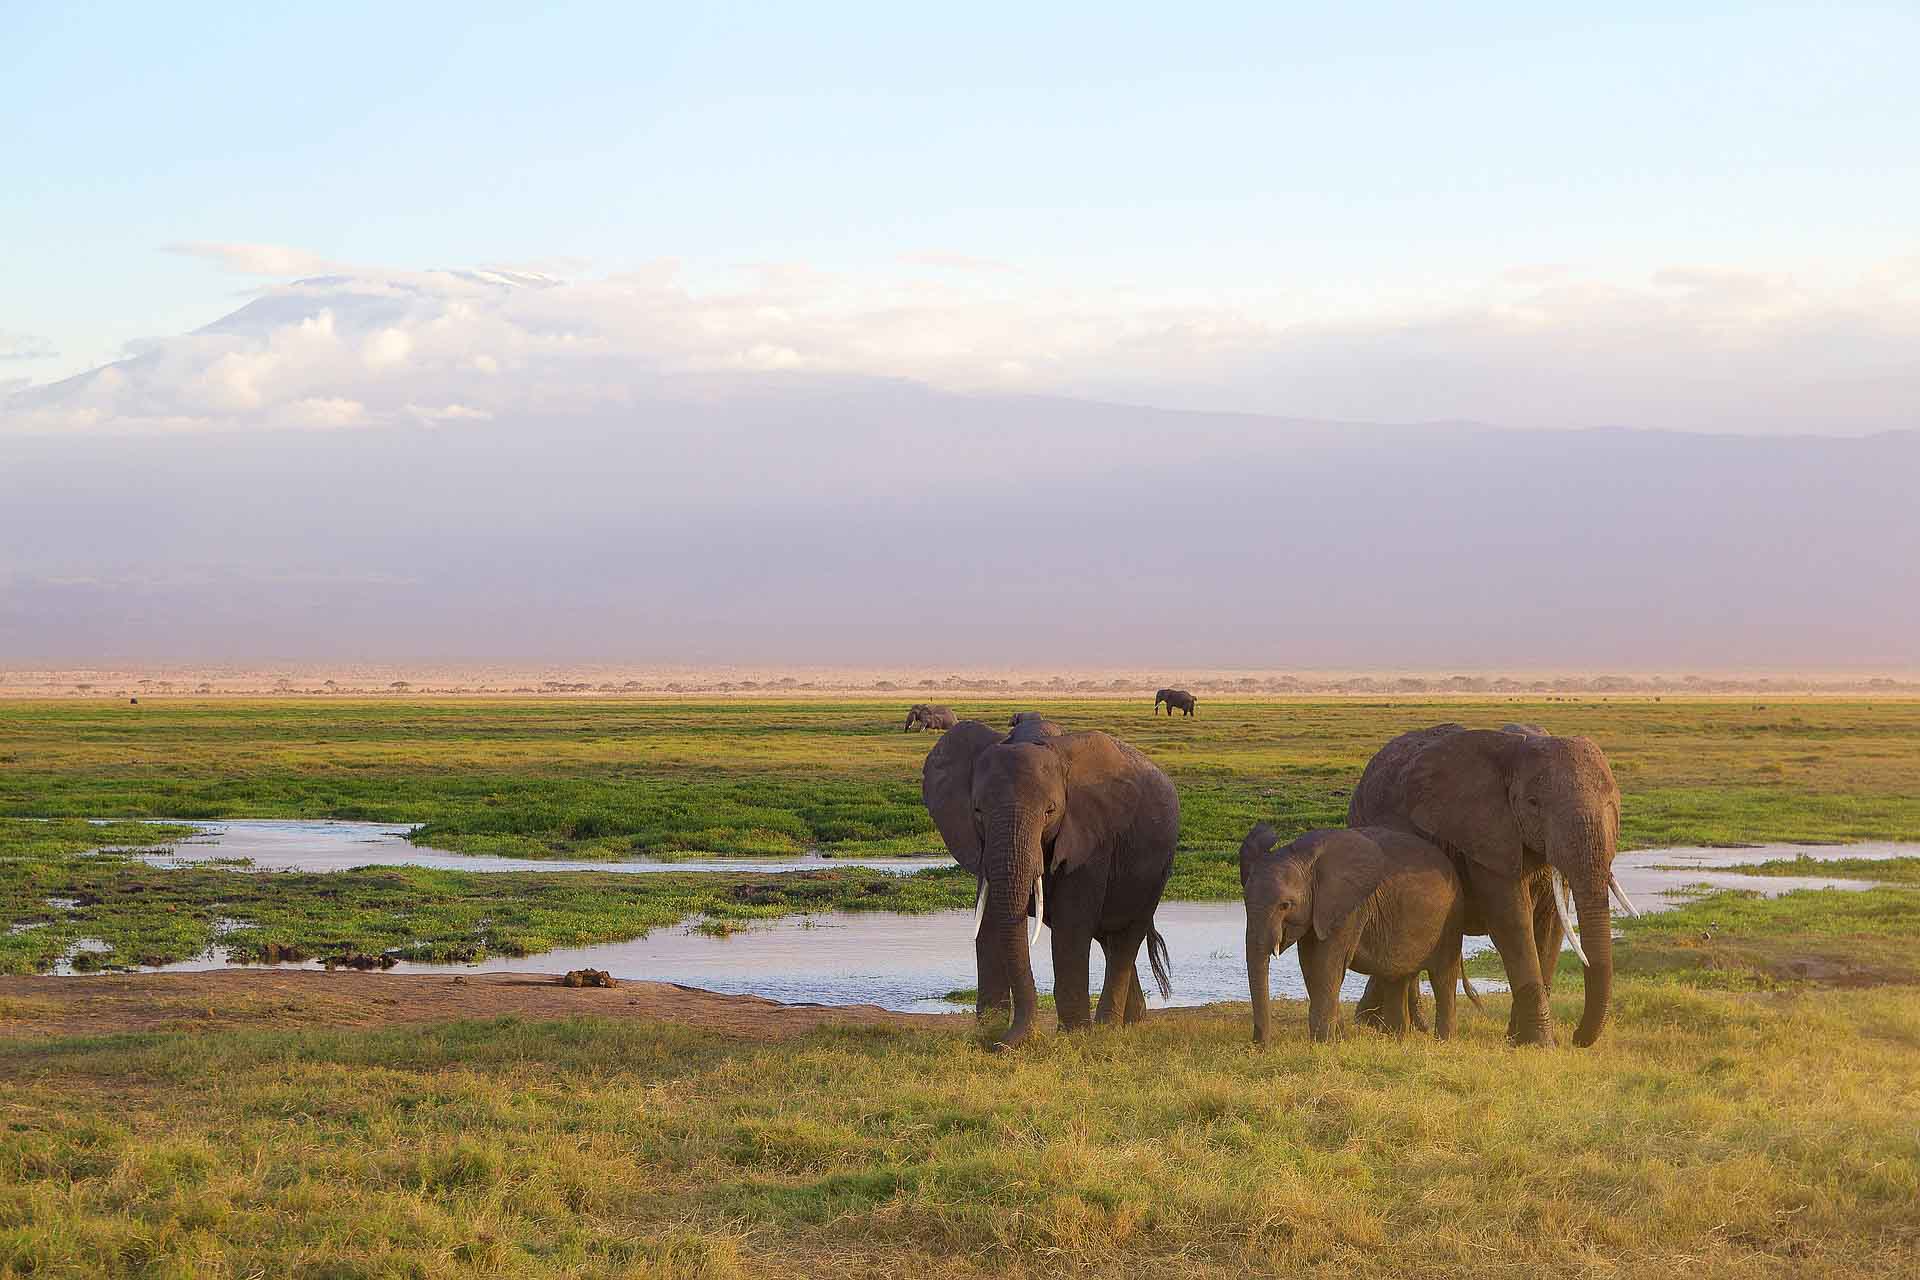 A family of elephants in Tanzania with the Kilimanjaro mountains in the background